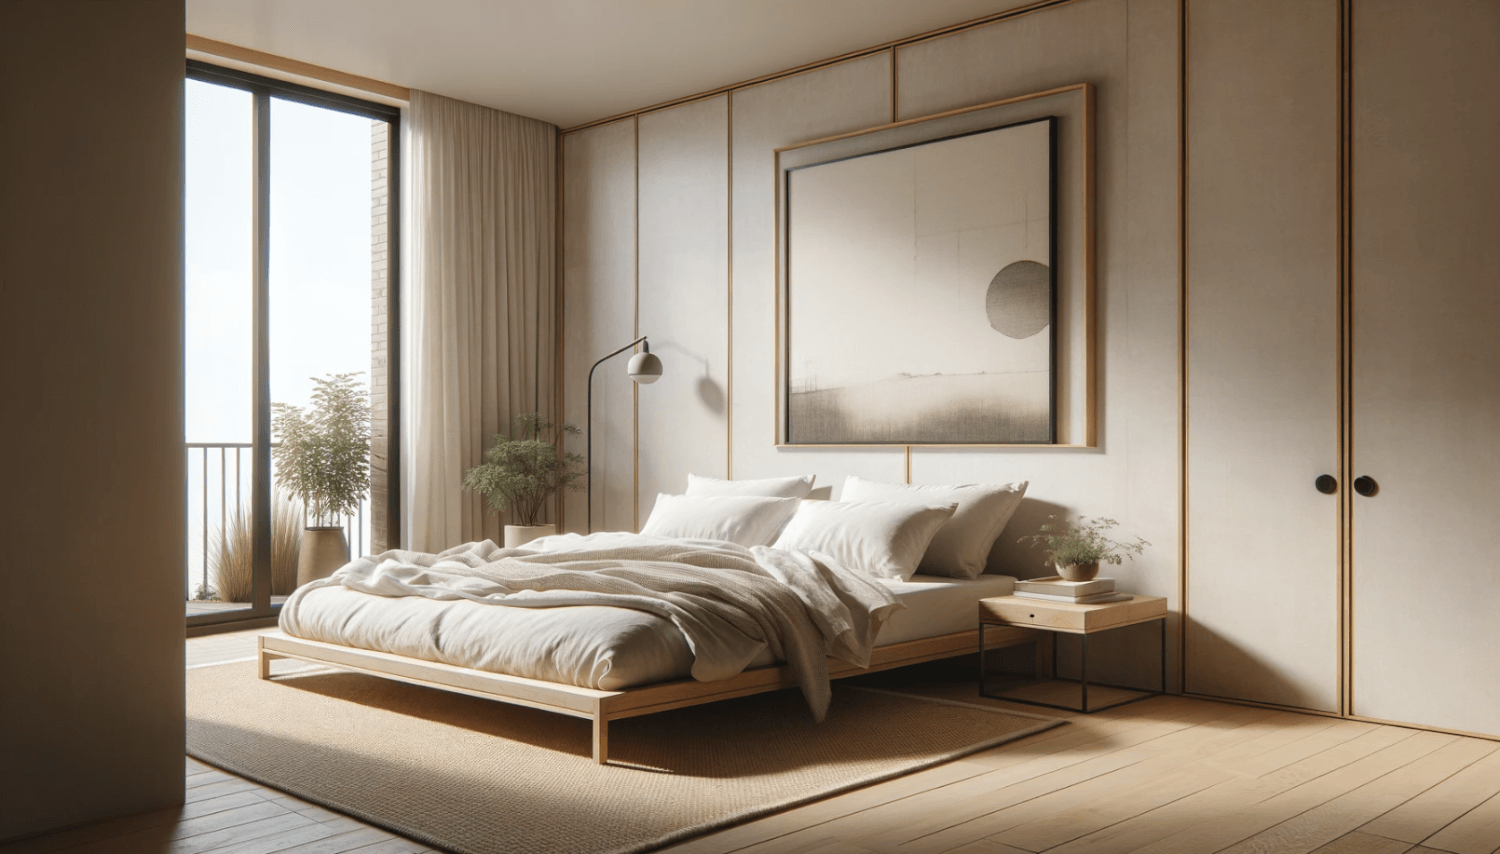 Japandi Home Decor: The Fusion of Functionality and Natural Beauty ...